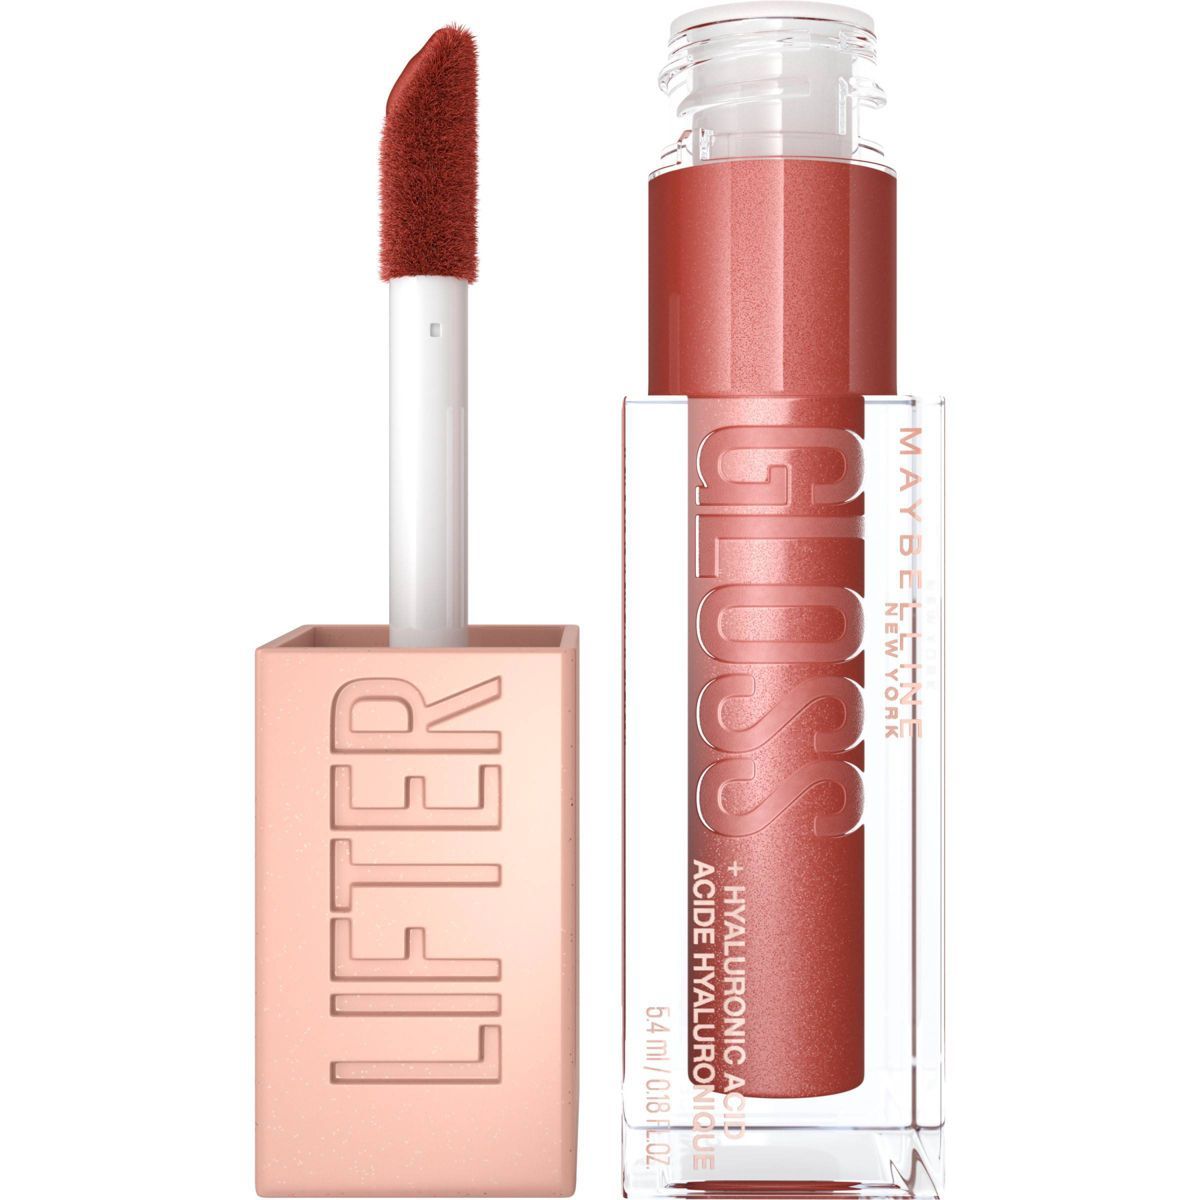 Maybelline Lifter Gloss Plumping Lip Gloss with Hyaluronic Acid - 0.18 fl oz | Target